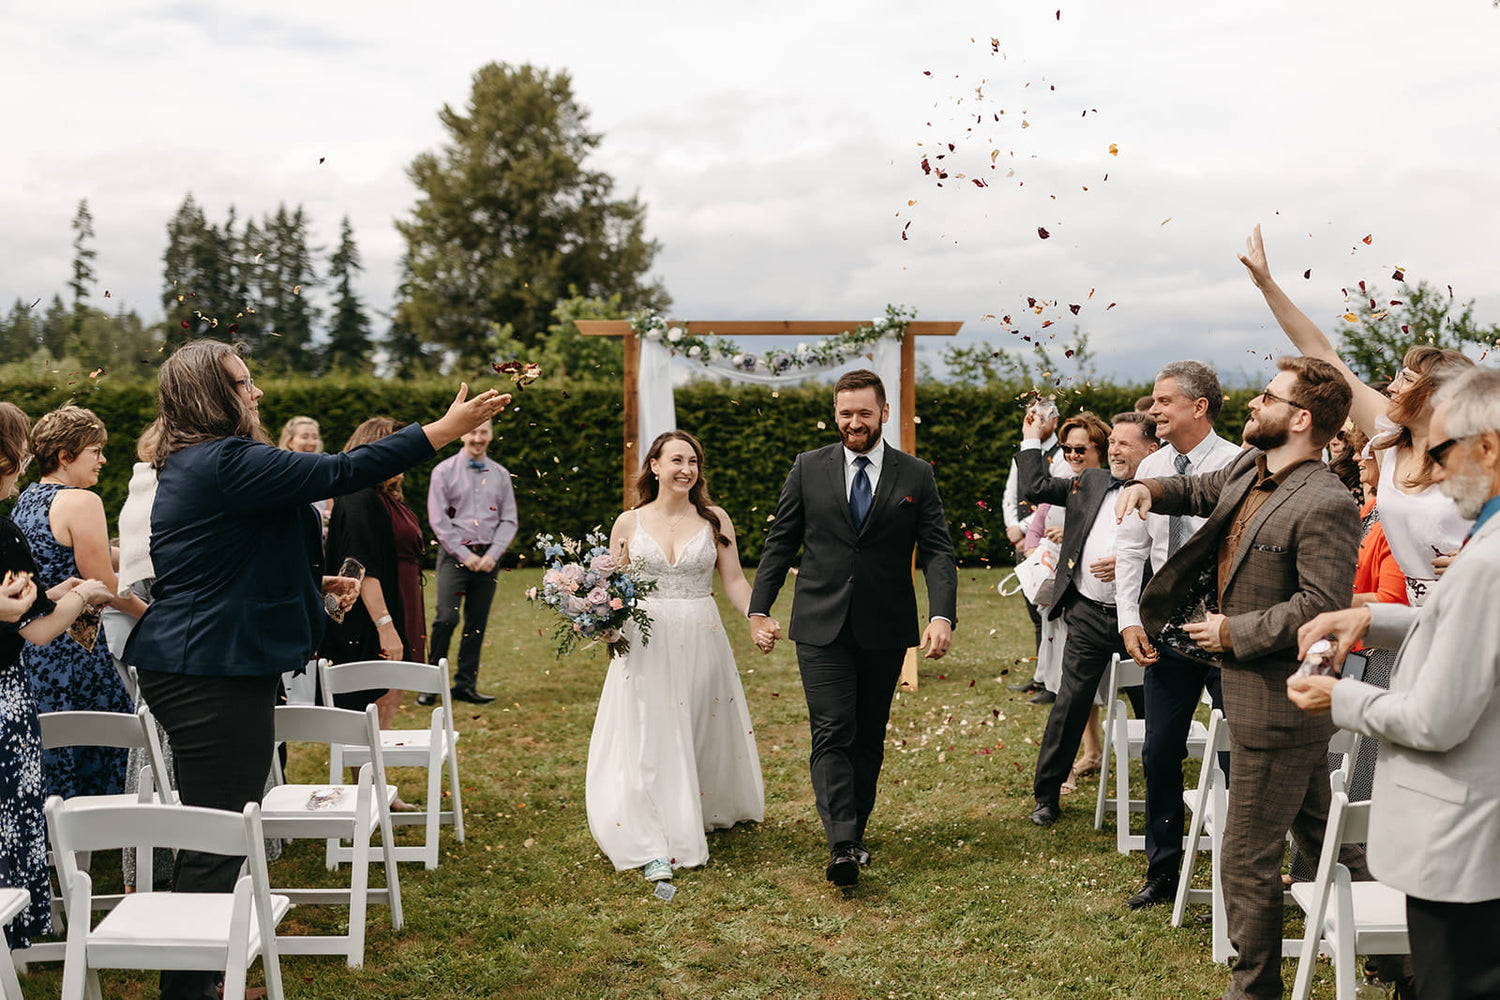 bride and groom walking back down the aisle with guests throwing flower petals